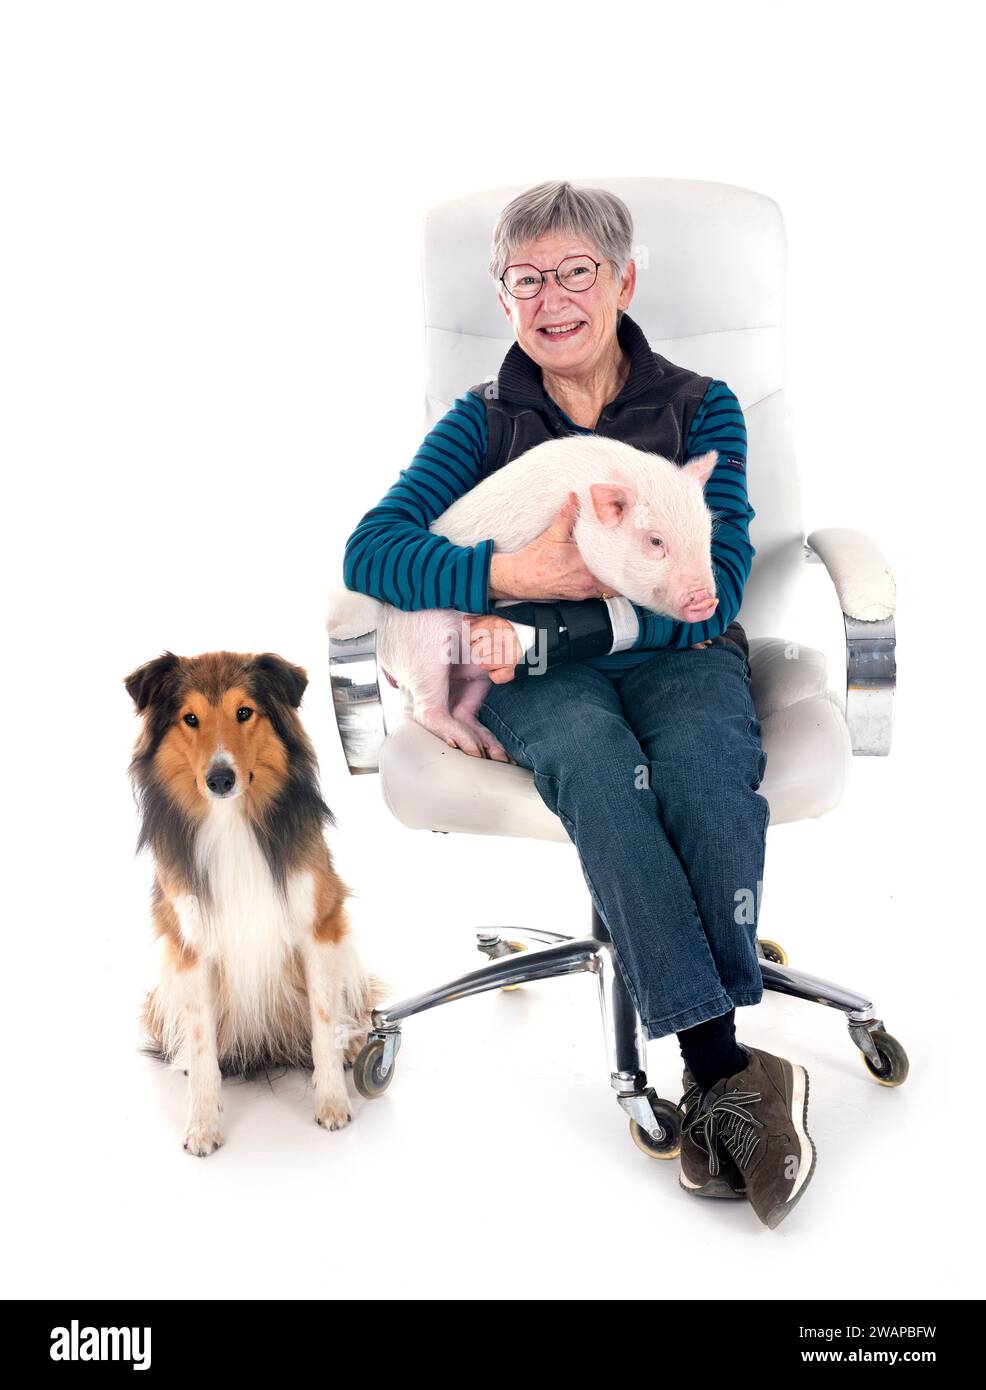 Shetland Sheepdog, pig and woman in front of white background Stock Photo